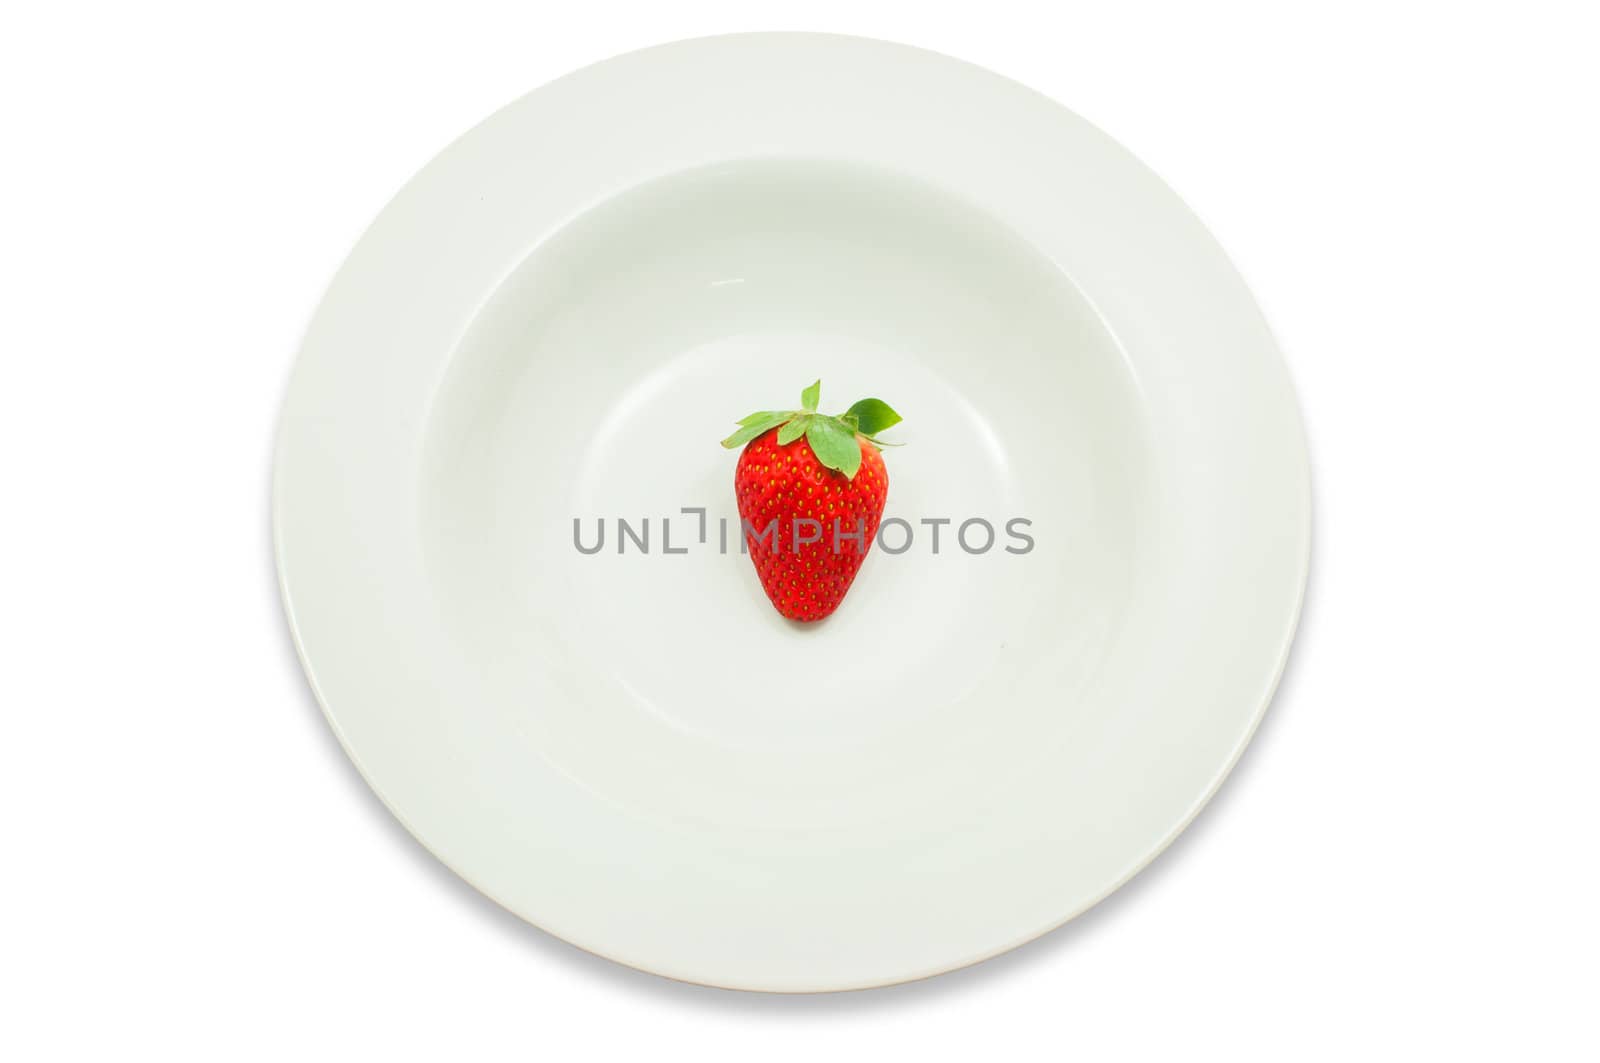 Strawberry in a plate by TanawatPontchour